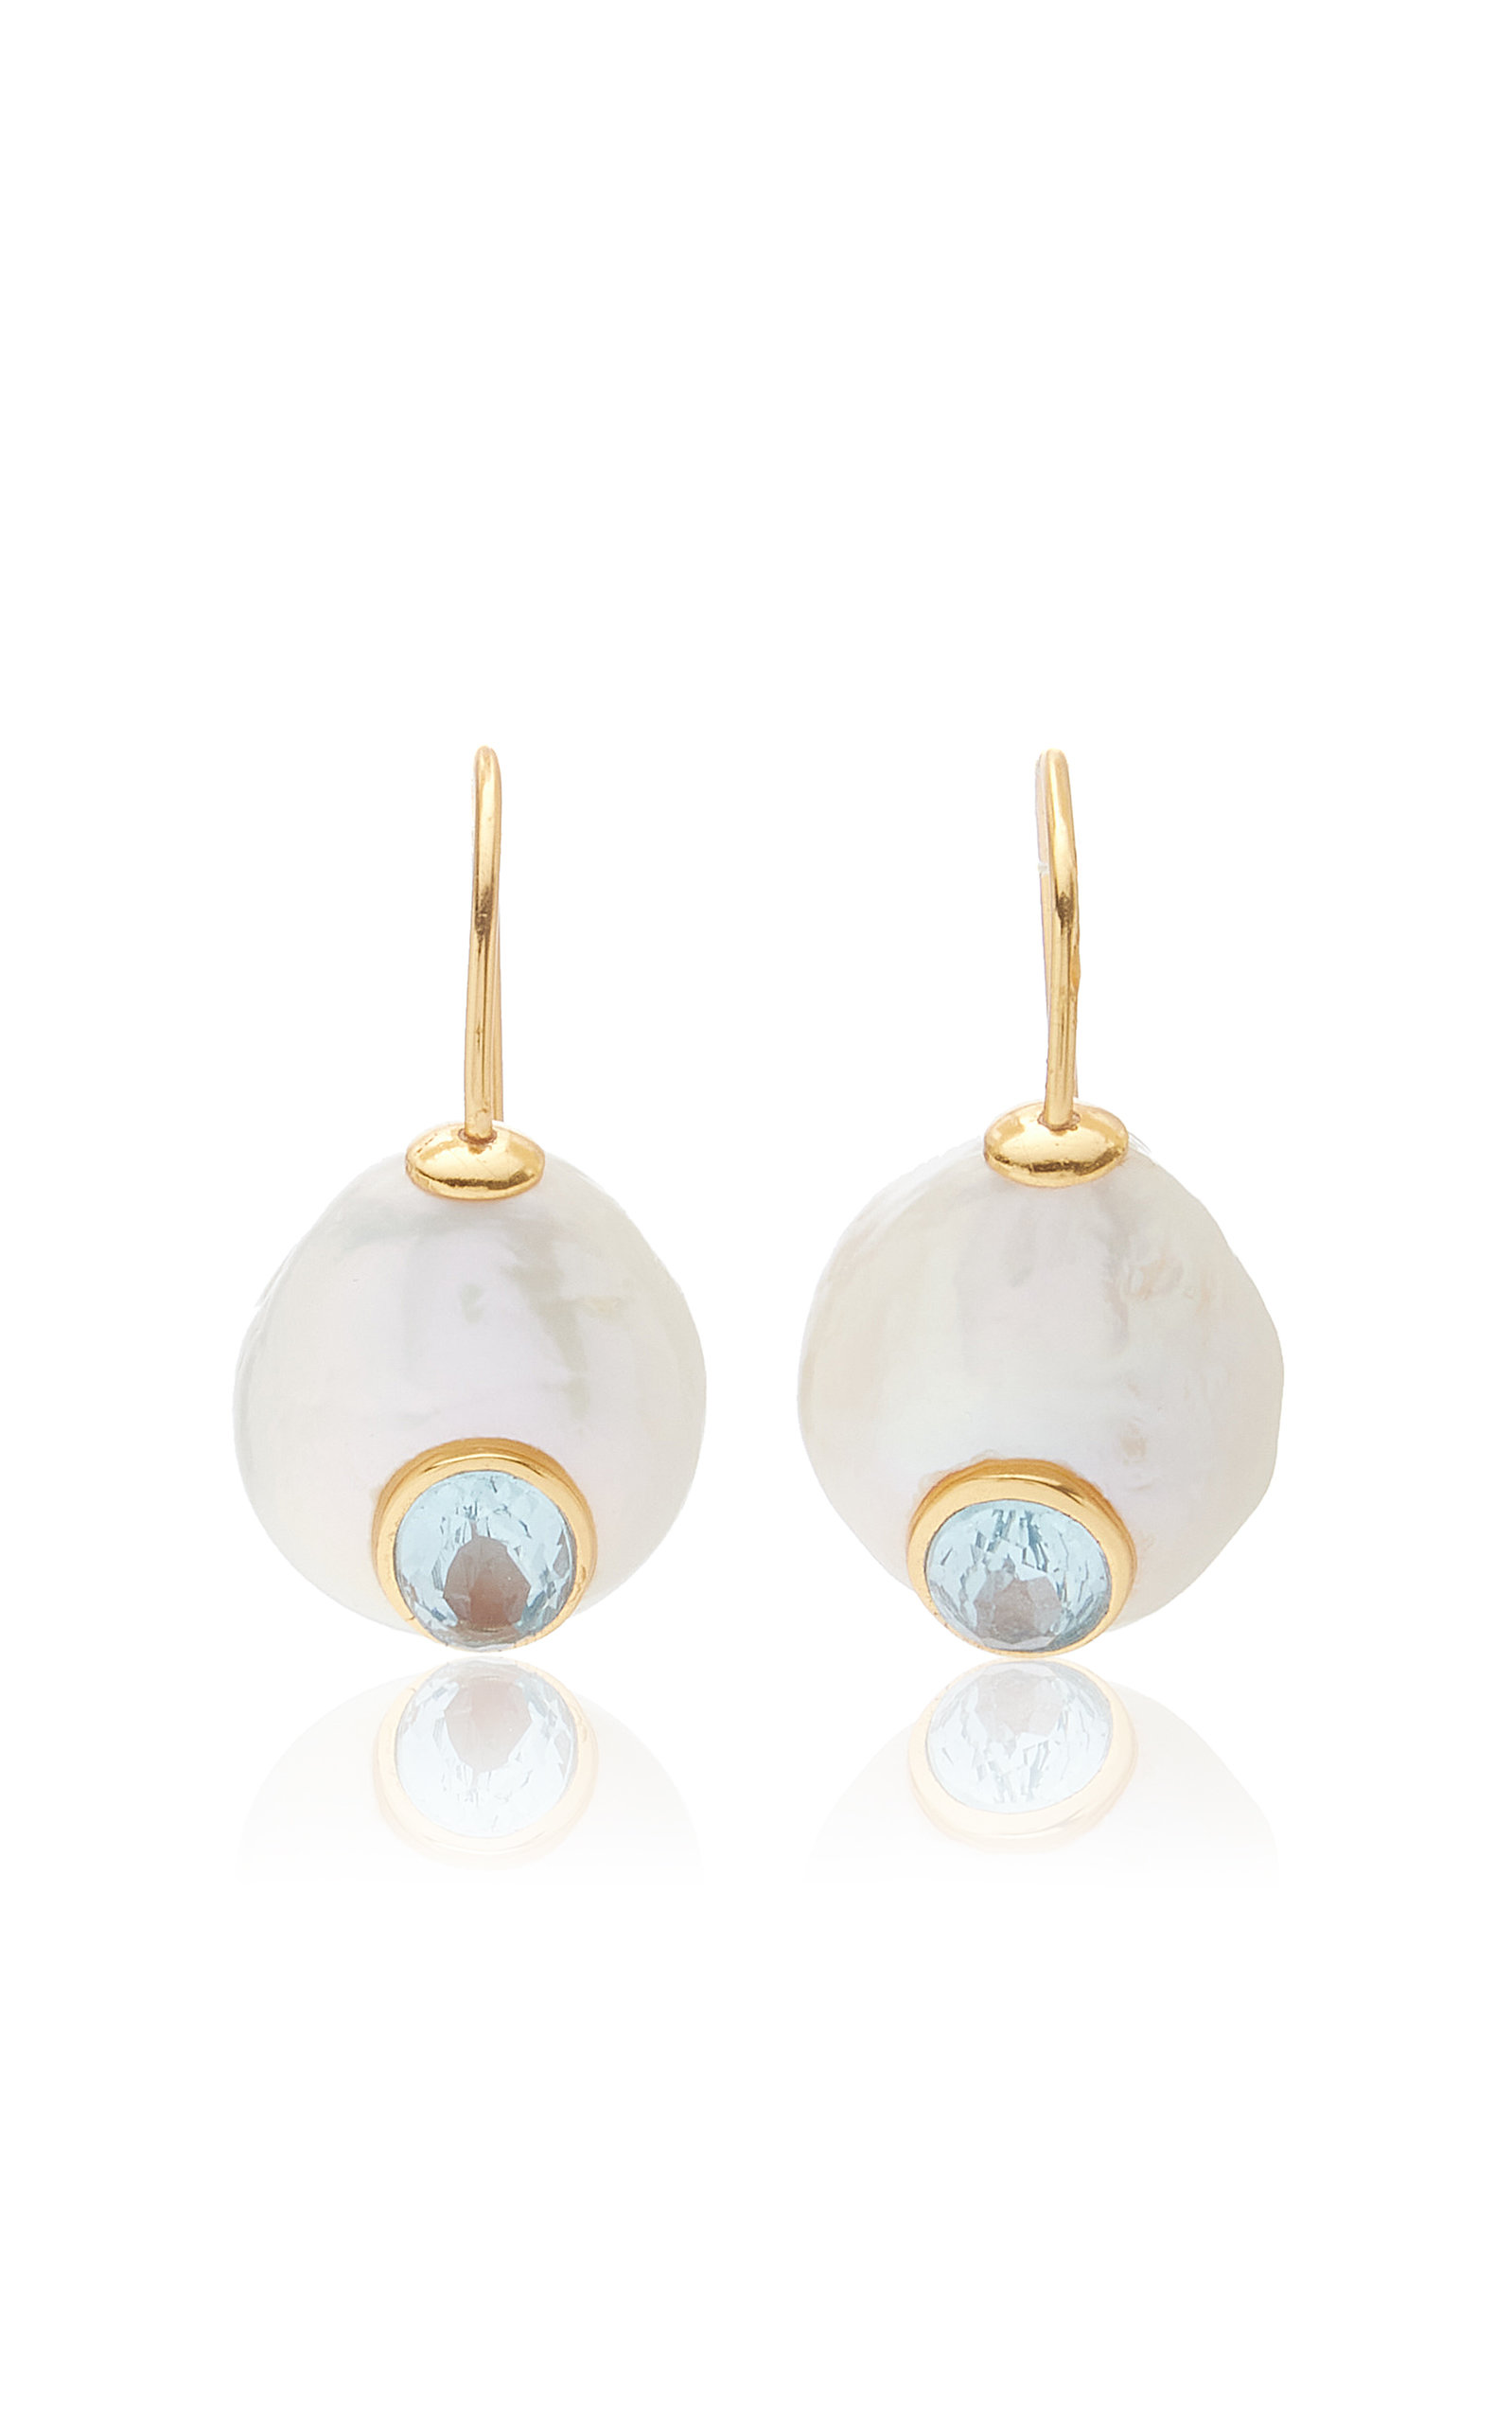 Lizzie Fortunato Women's Pearl Pablo Gold-Plated Sterling Silver Topaz Earrings